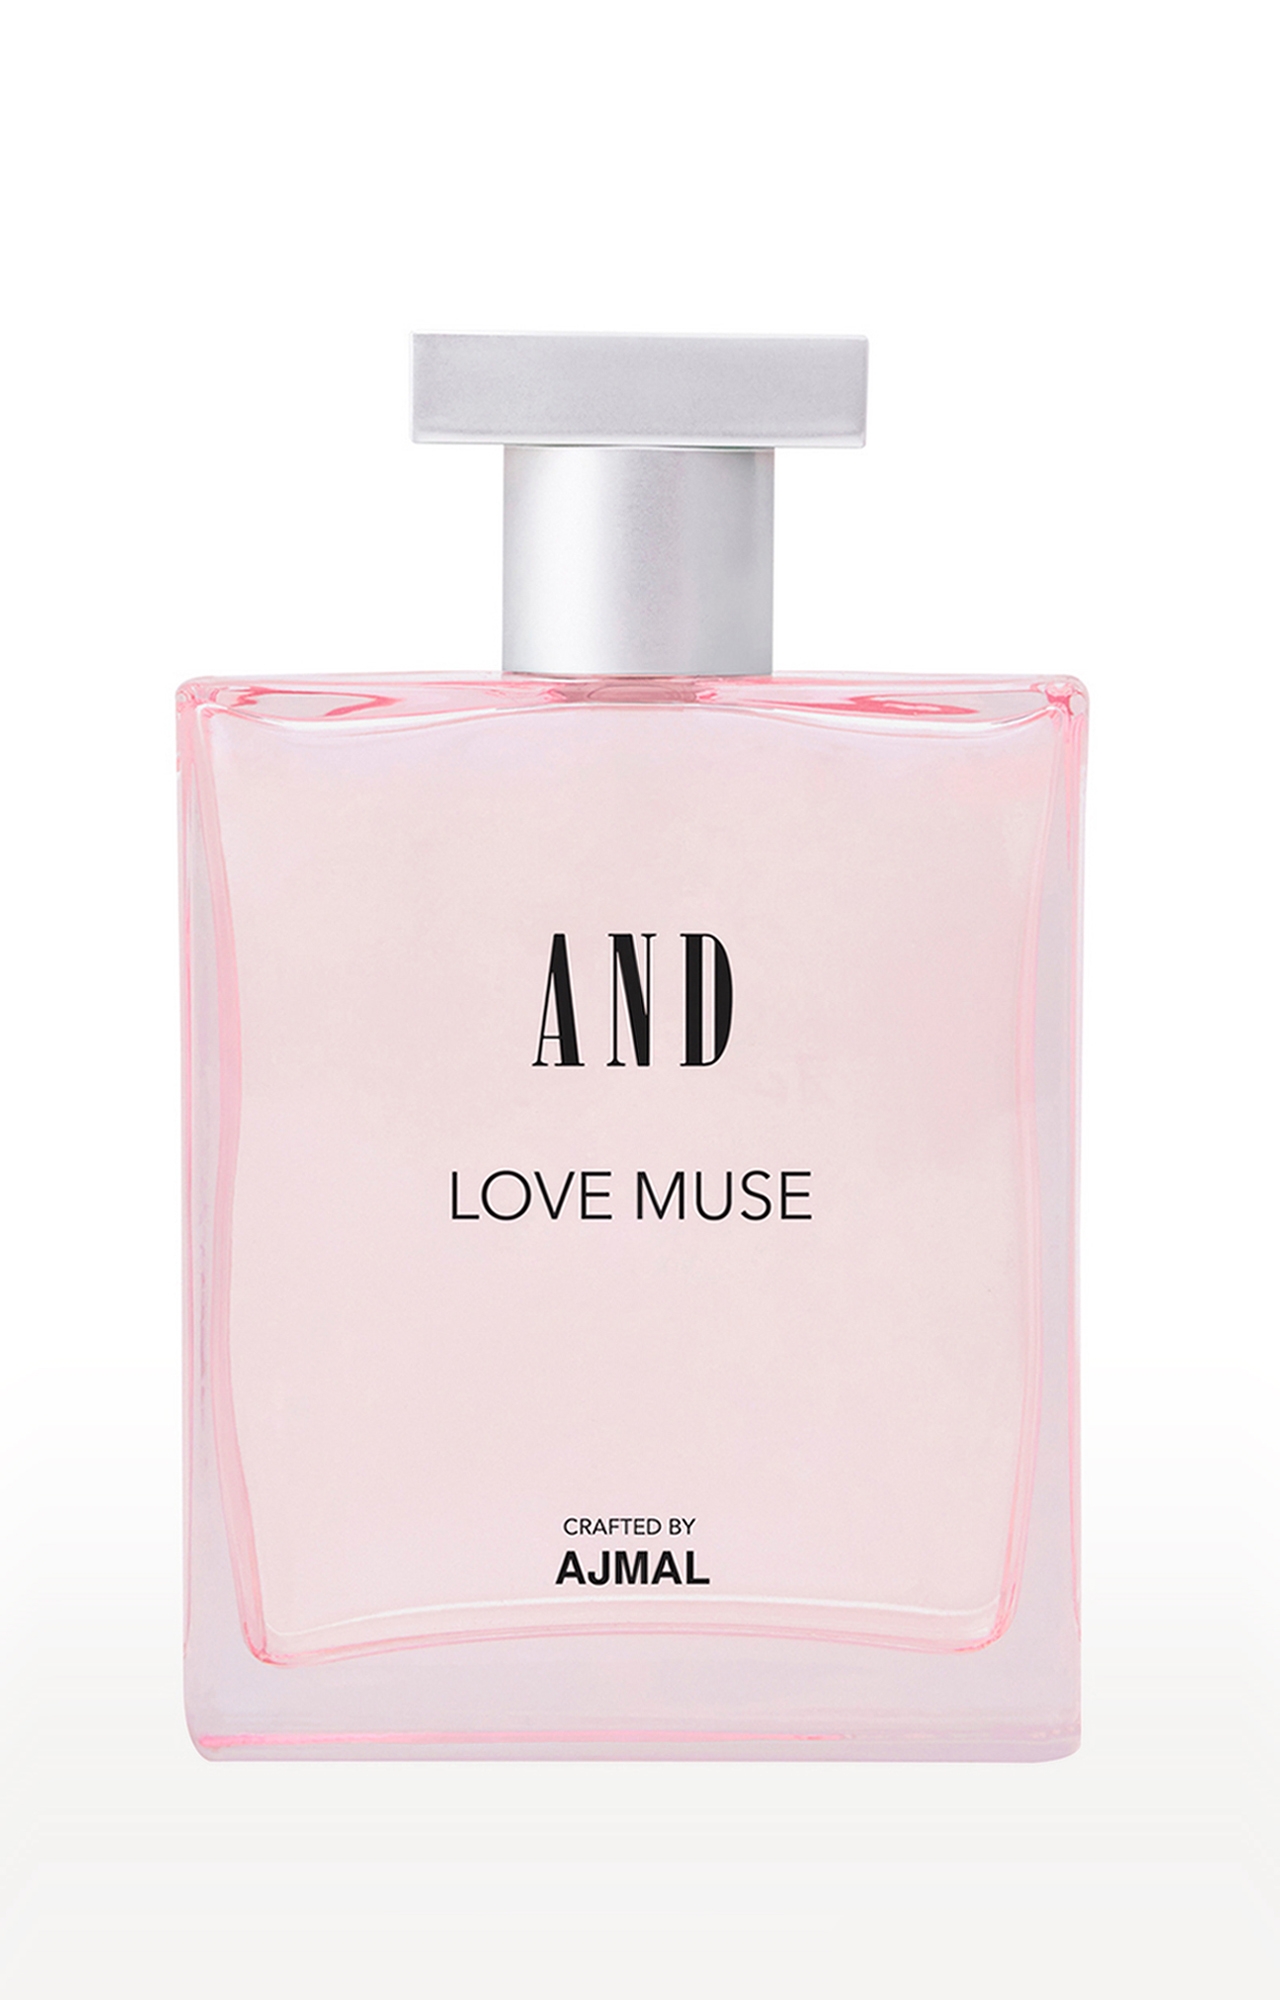 And Love Muse Eau De Parfum 100ML Long Lasting Scent Spray Gift For Women Crafted By Ajmal